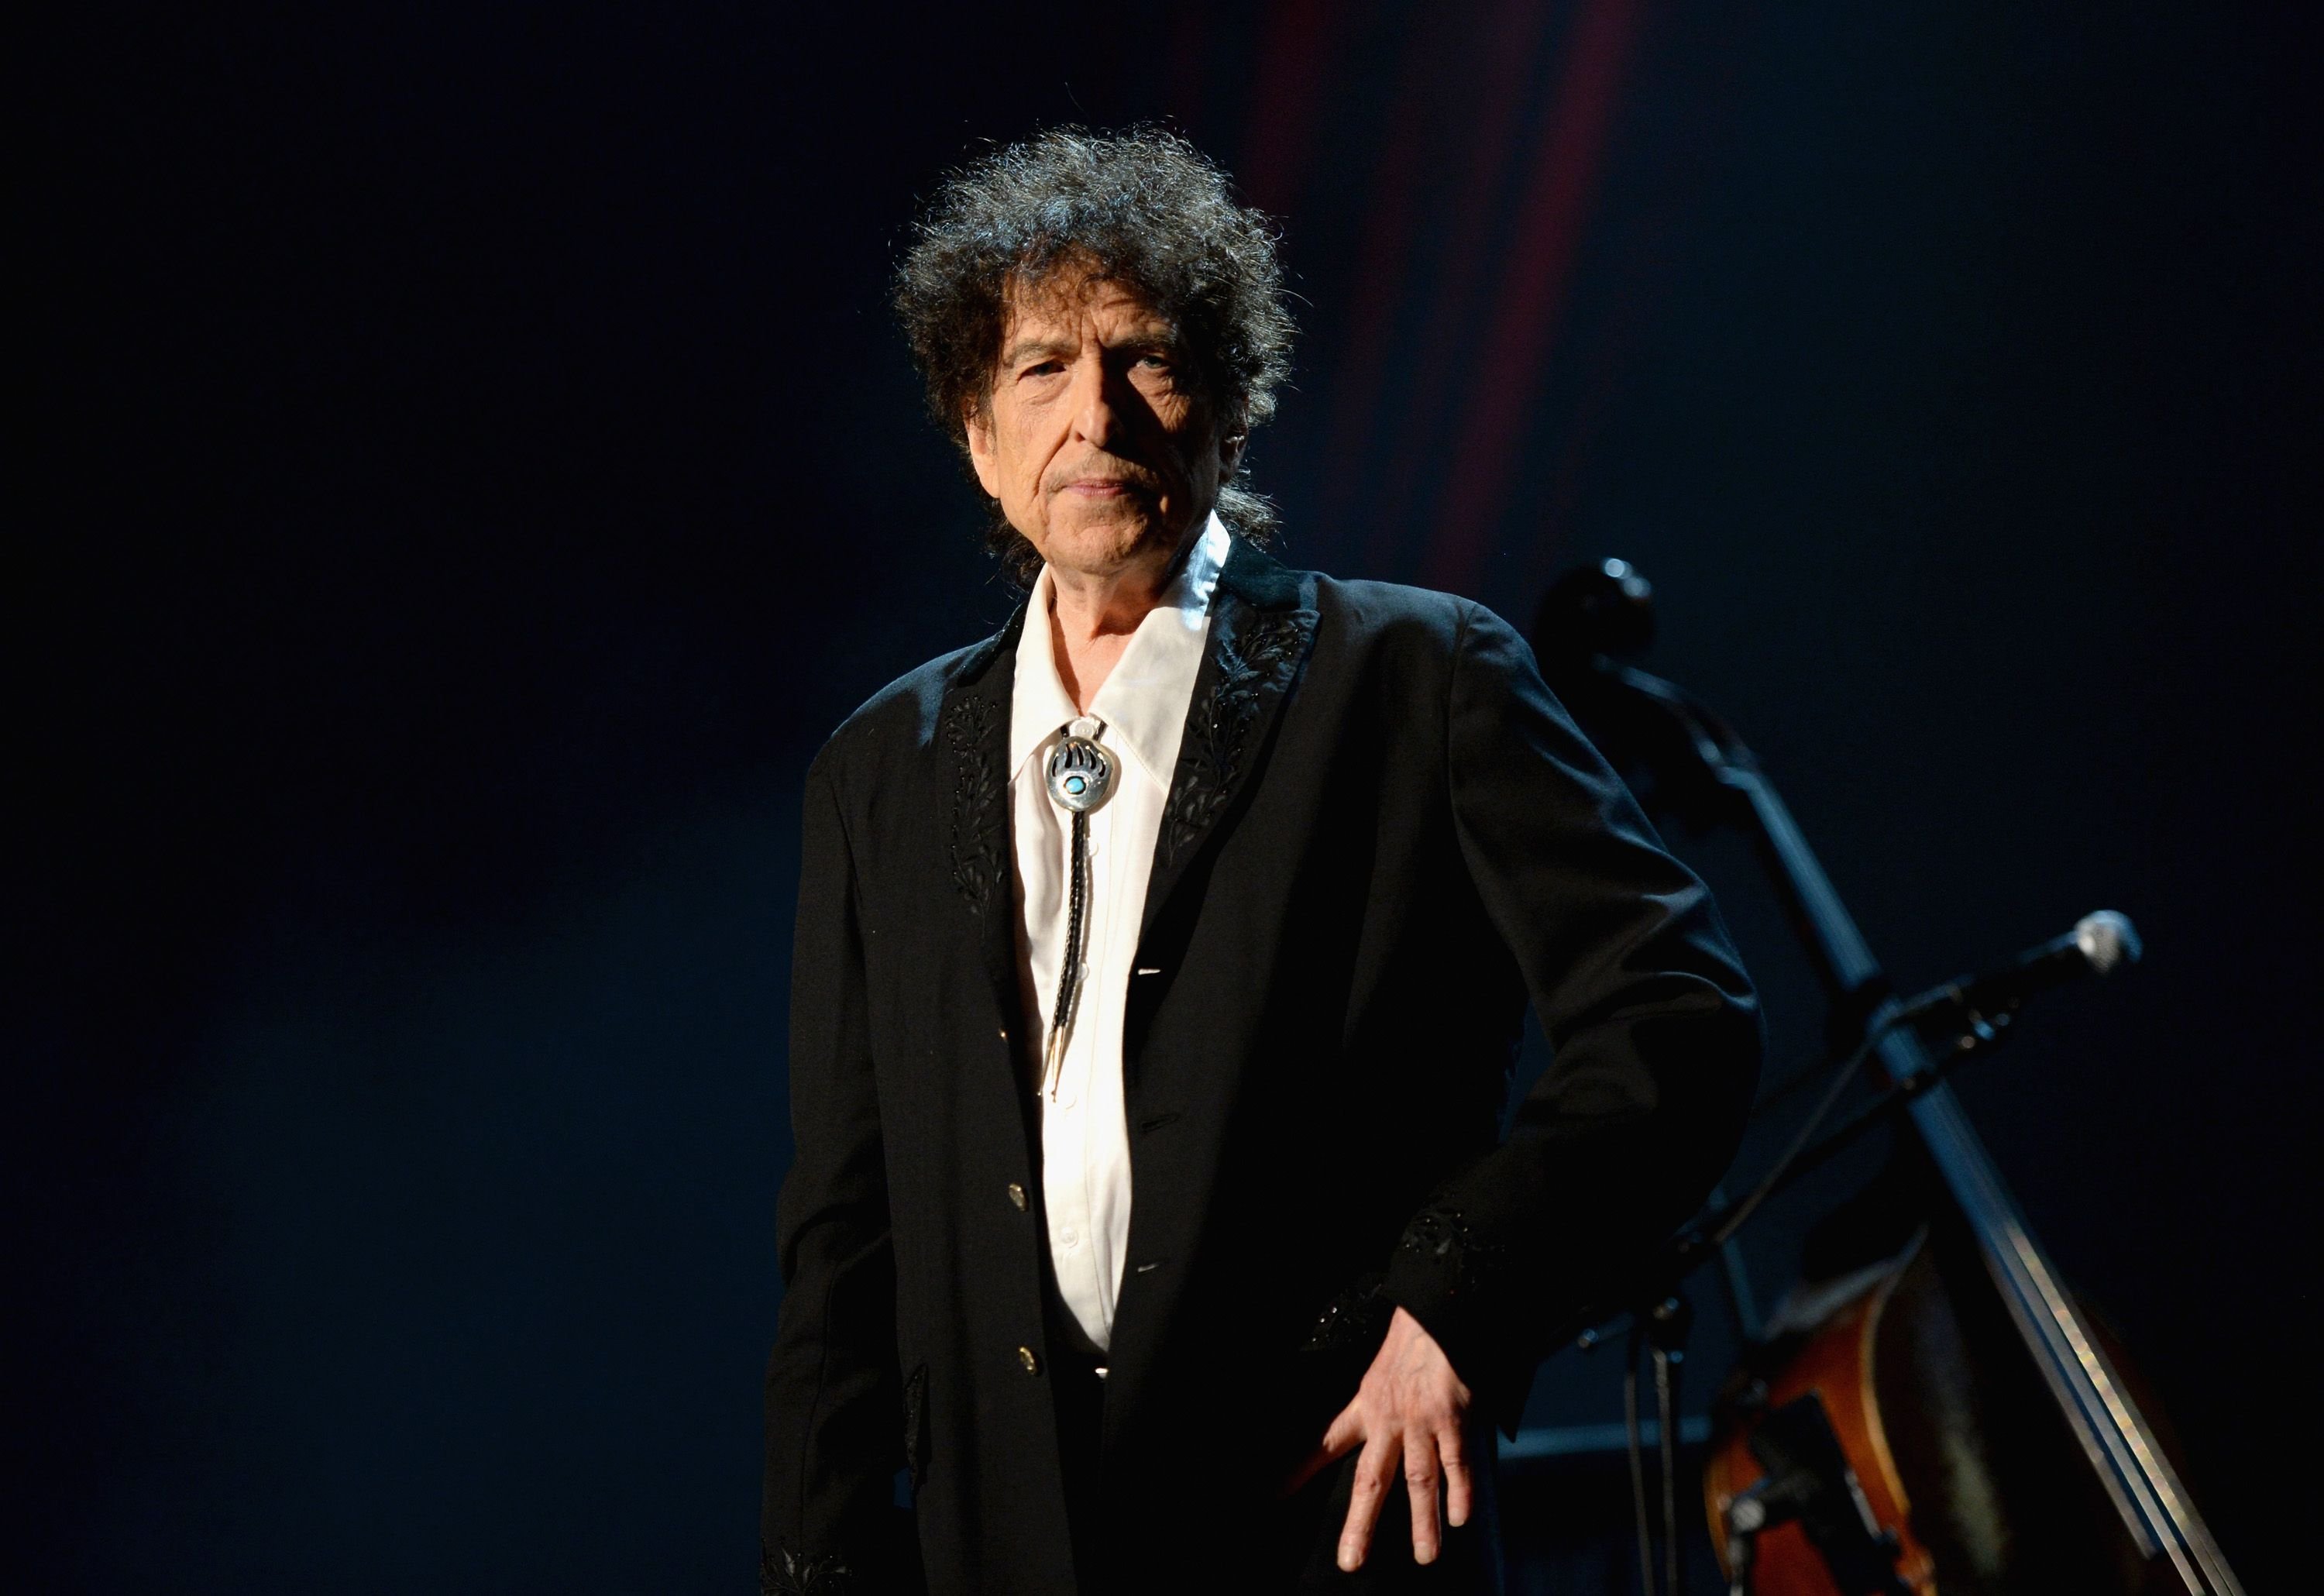 Bob Dylan at the 25th anniversary MusiCares 2015 Person Of The Year Gala in his honor in Los Angeles, California | Source: Getty Images